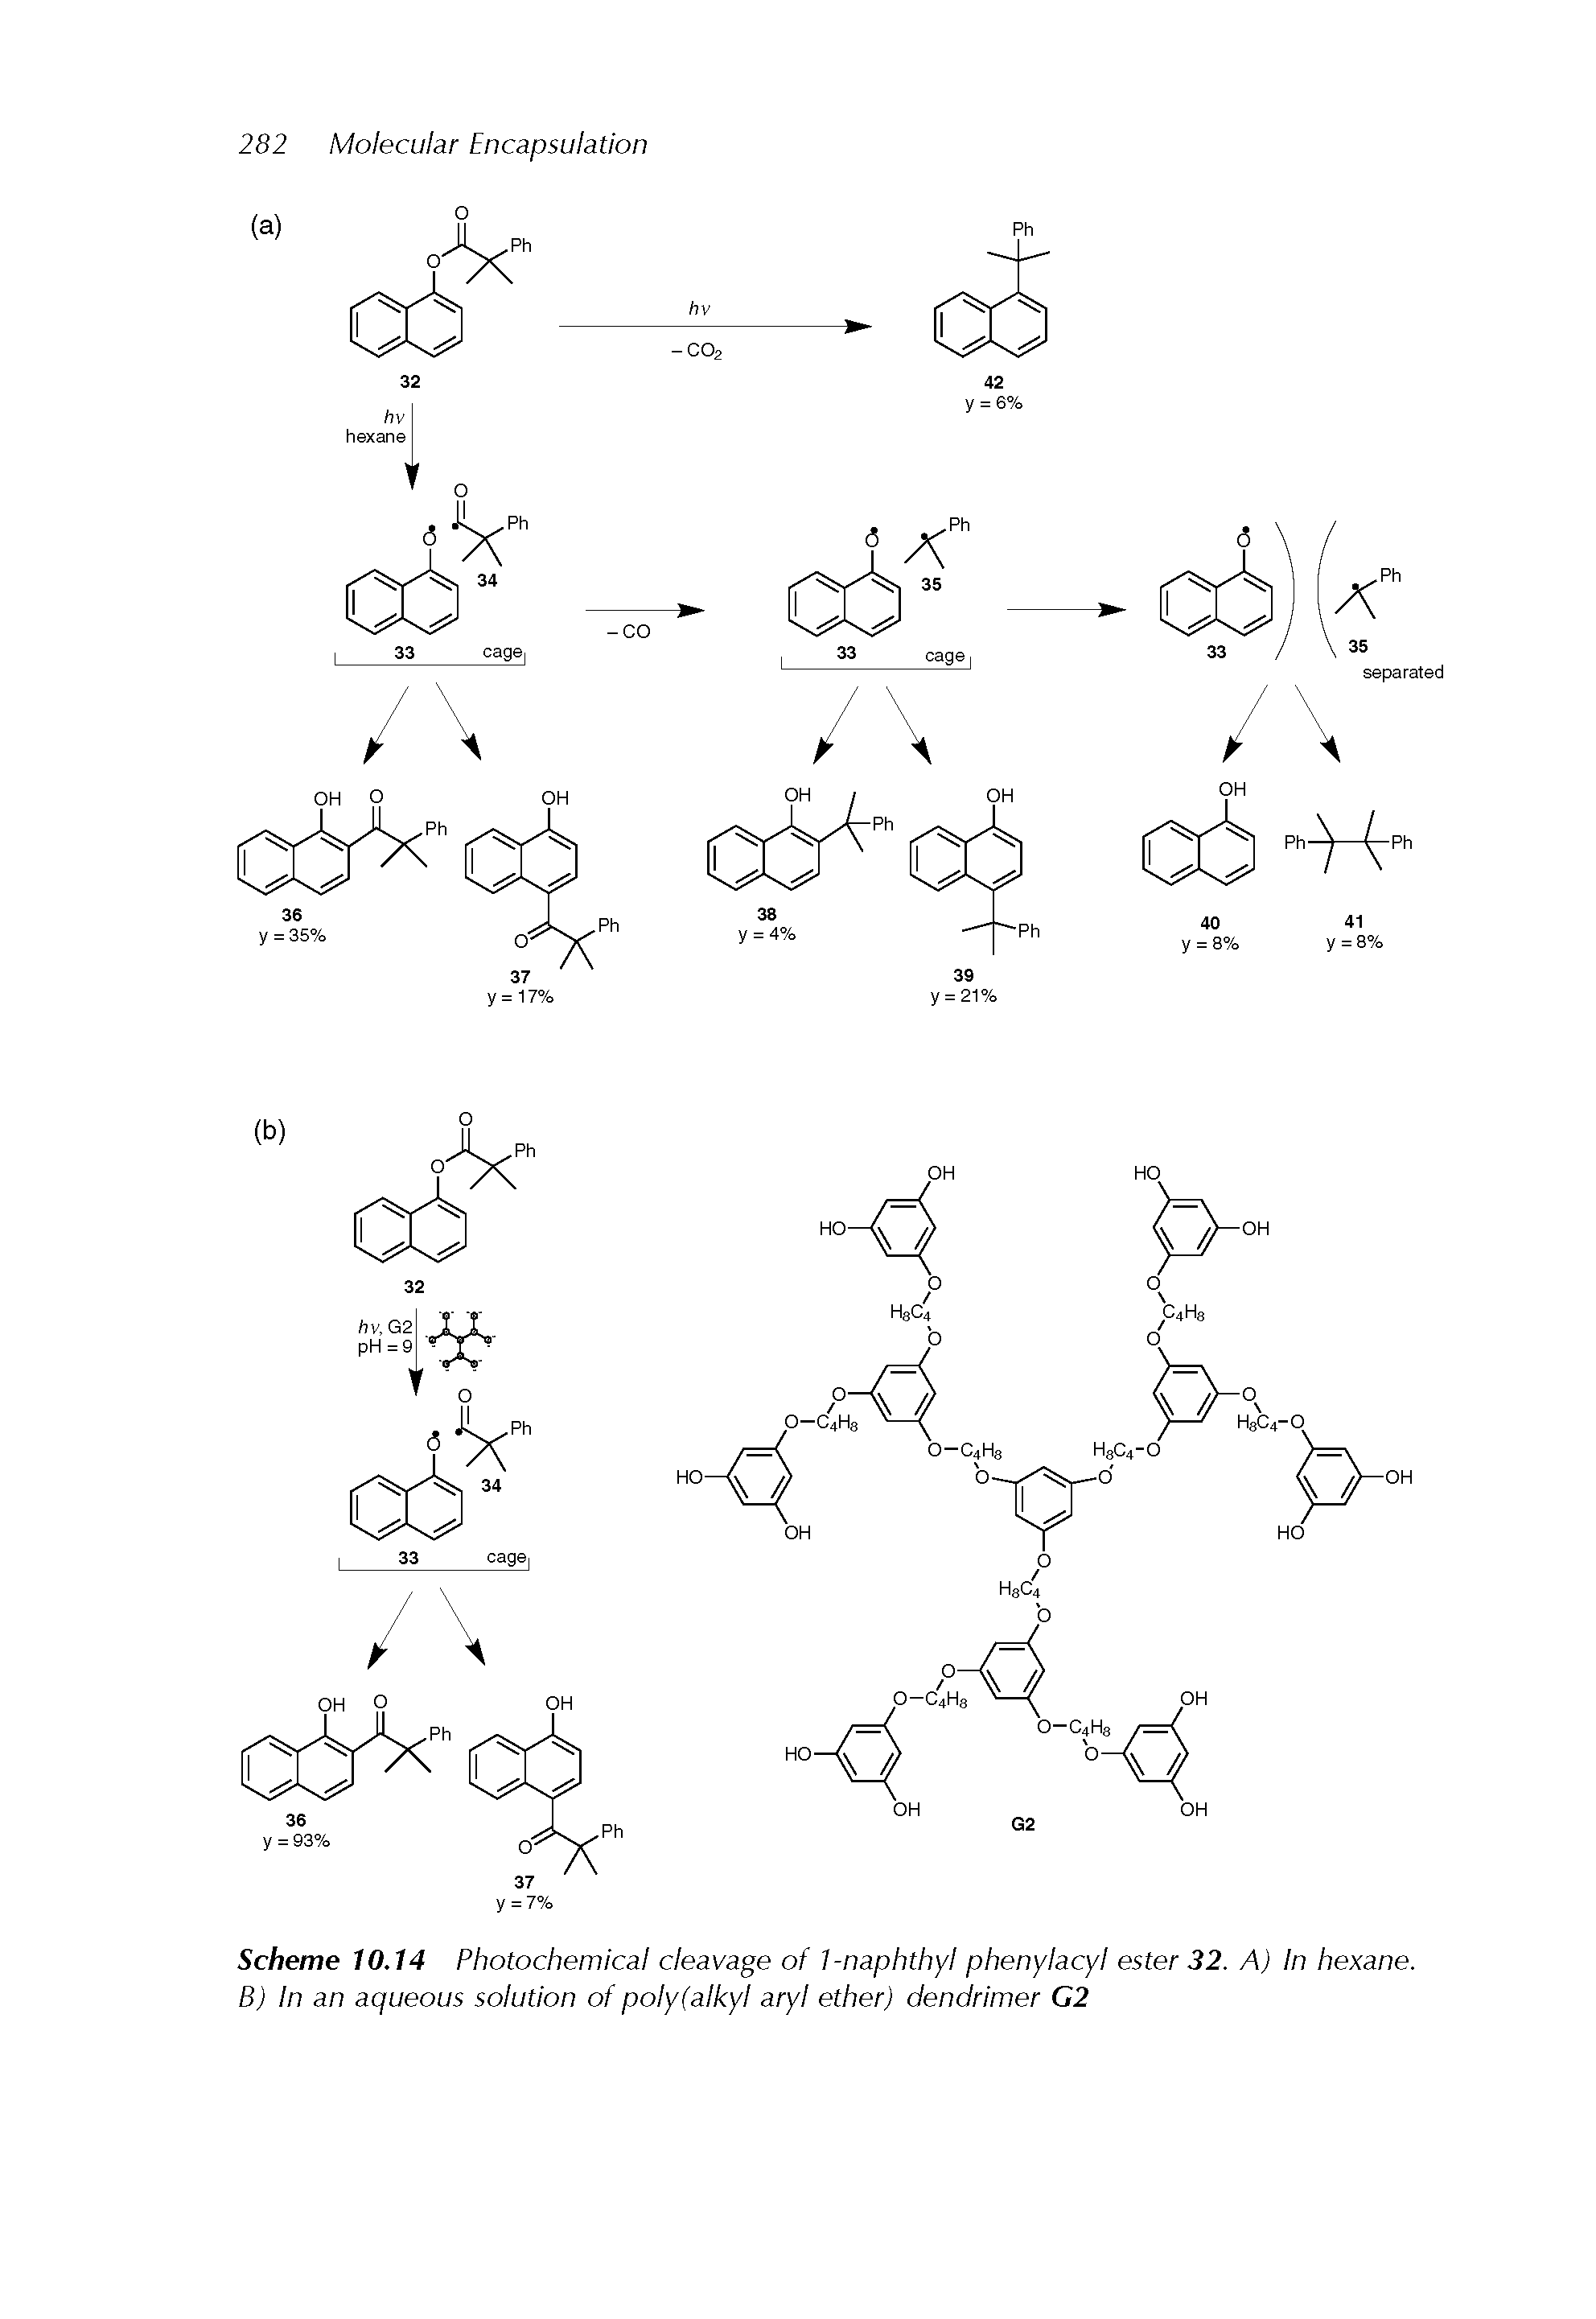 Scheme 10.14 Photochemical cleavage of I-naphthyl phenylacyl ester 32. A) In hexane. B) In an aqueous solution of poly (alkyl aryl ether) dendrimer G2...